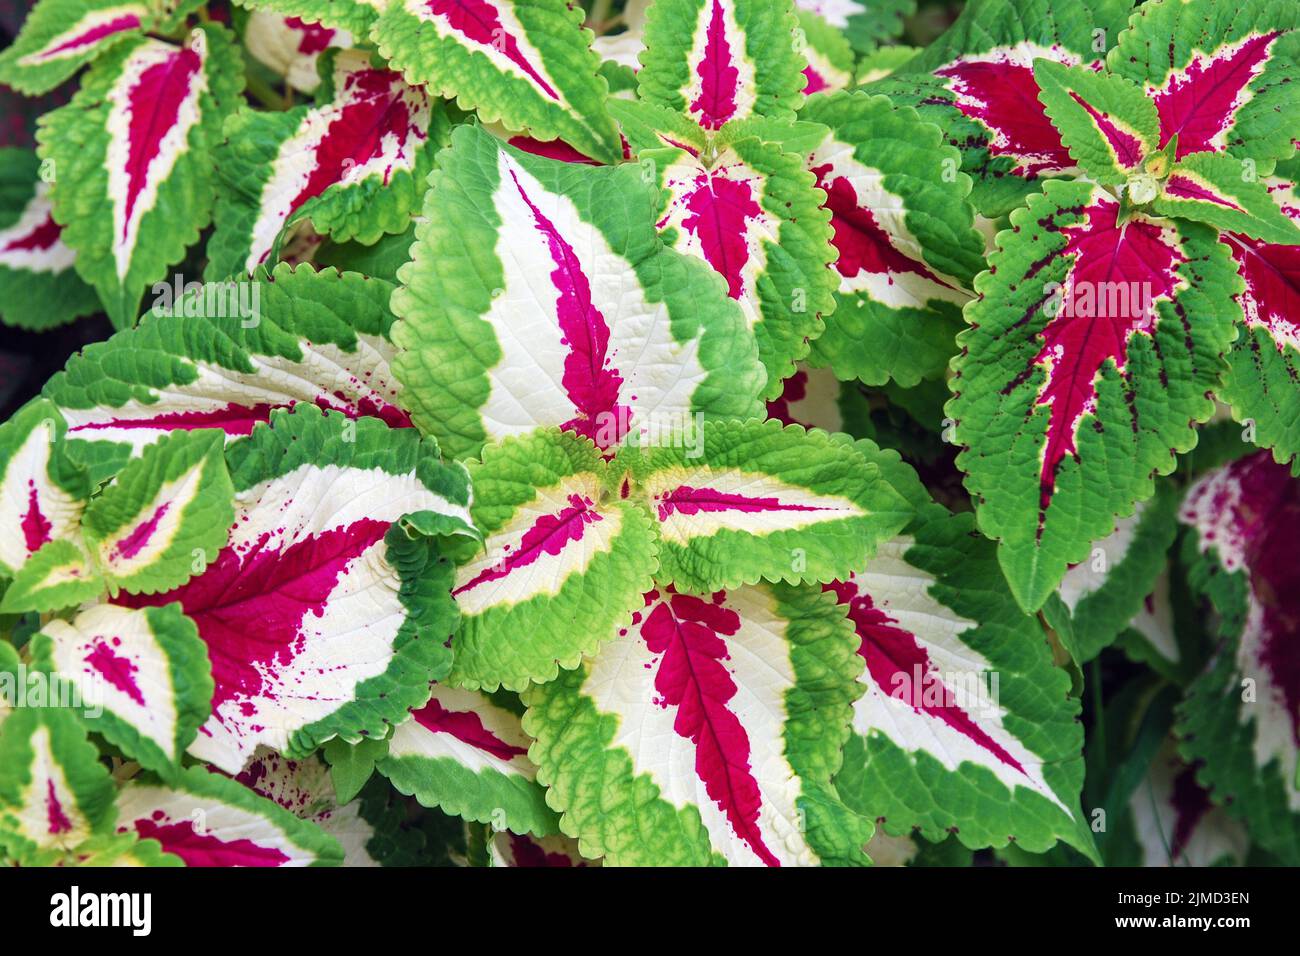 Solenostemon or Coleus (Plectranthus scutellarioides) cultivated for variegated leaves Stock Photo